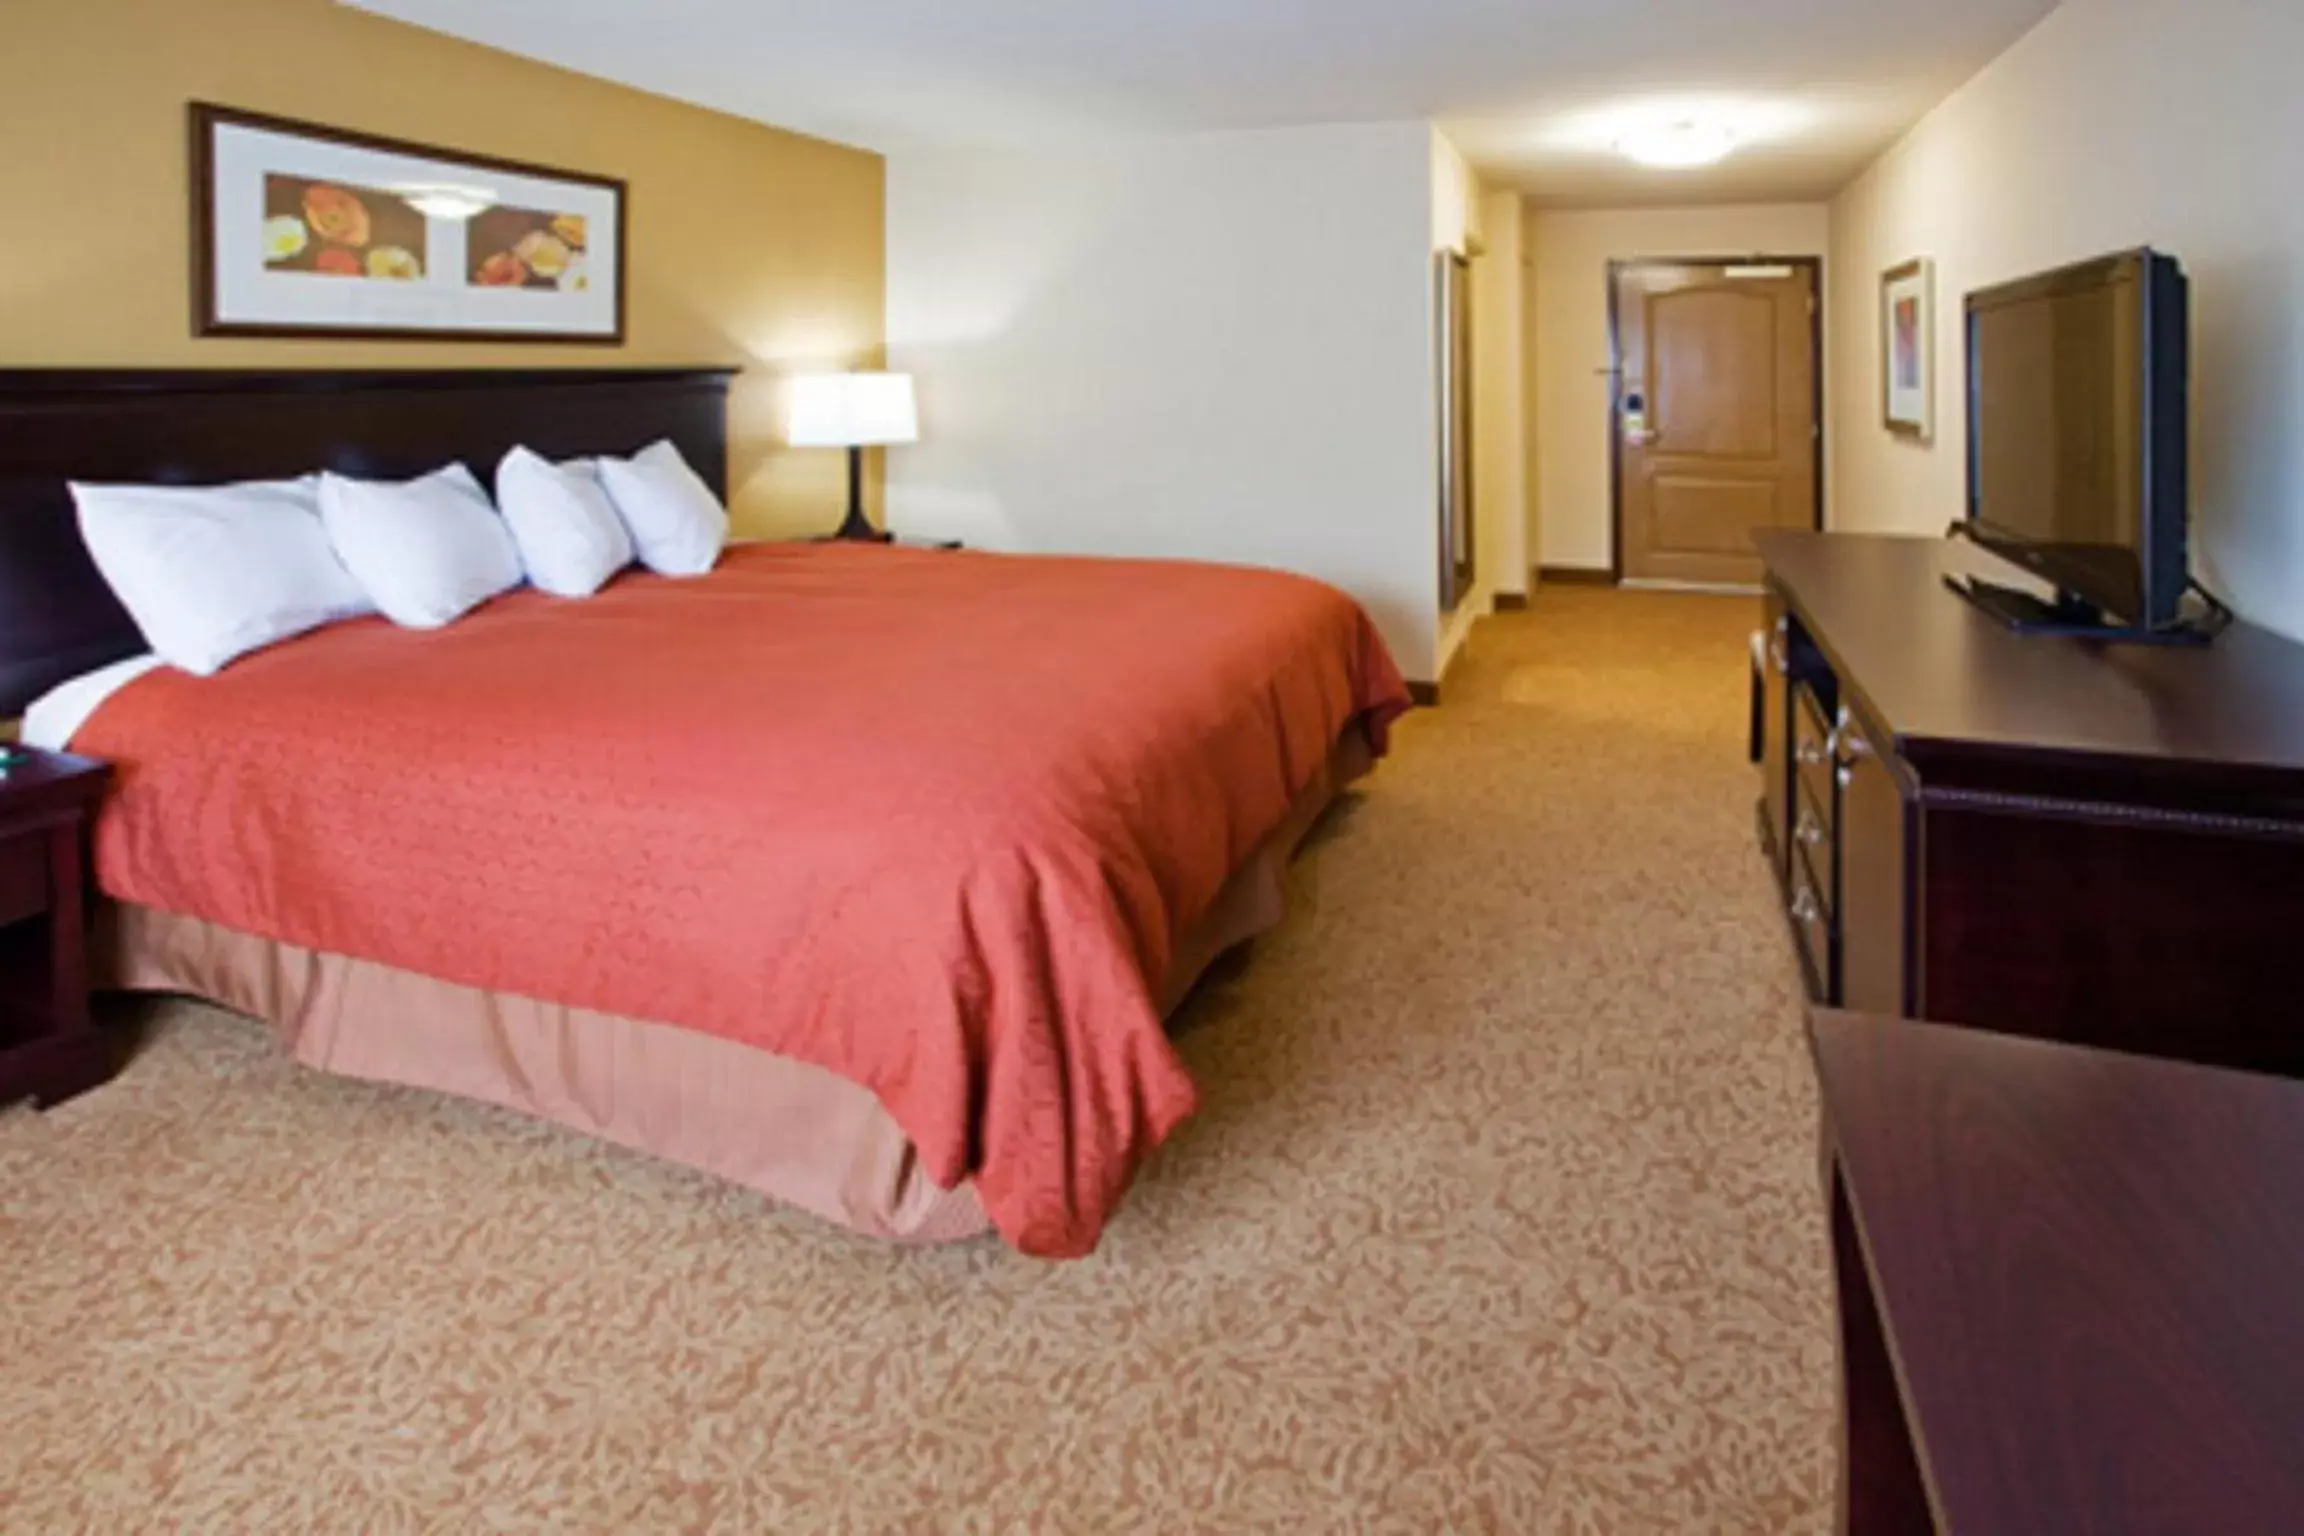 King Room - Disability Access/Non-Smoking in Country Inn & Suites by Radisson, Rome, GA